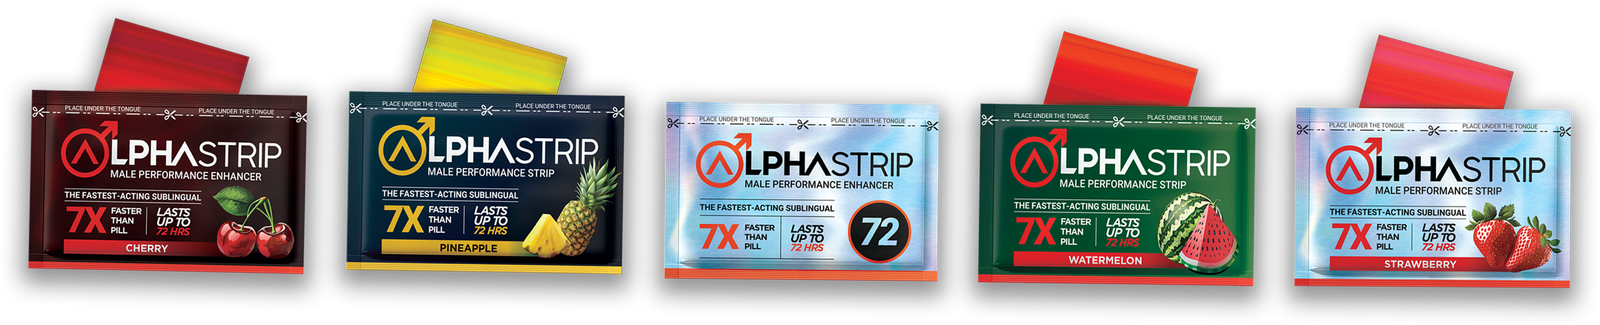 AlphaStrip Big Daddy All Natural Sublingual Strips Gummies